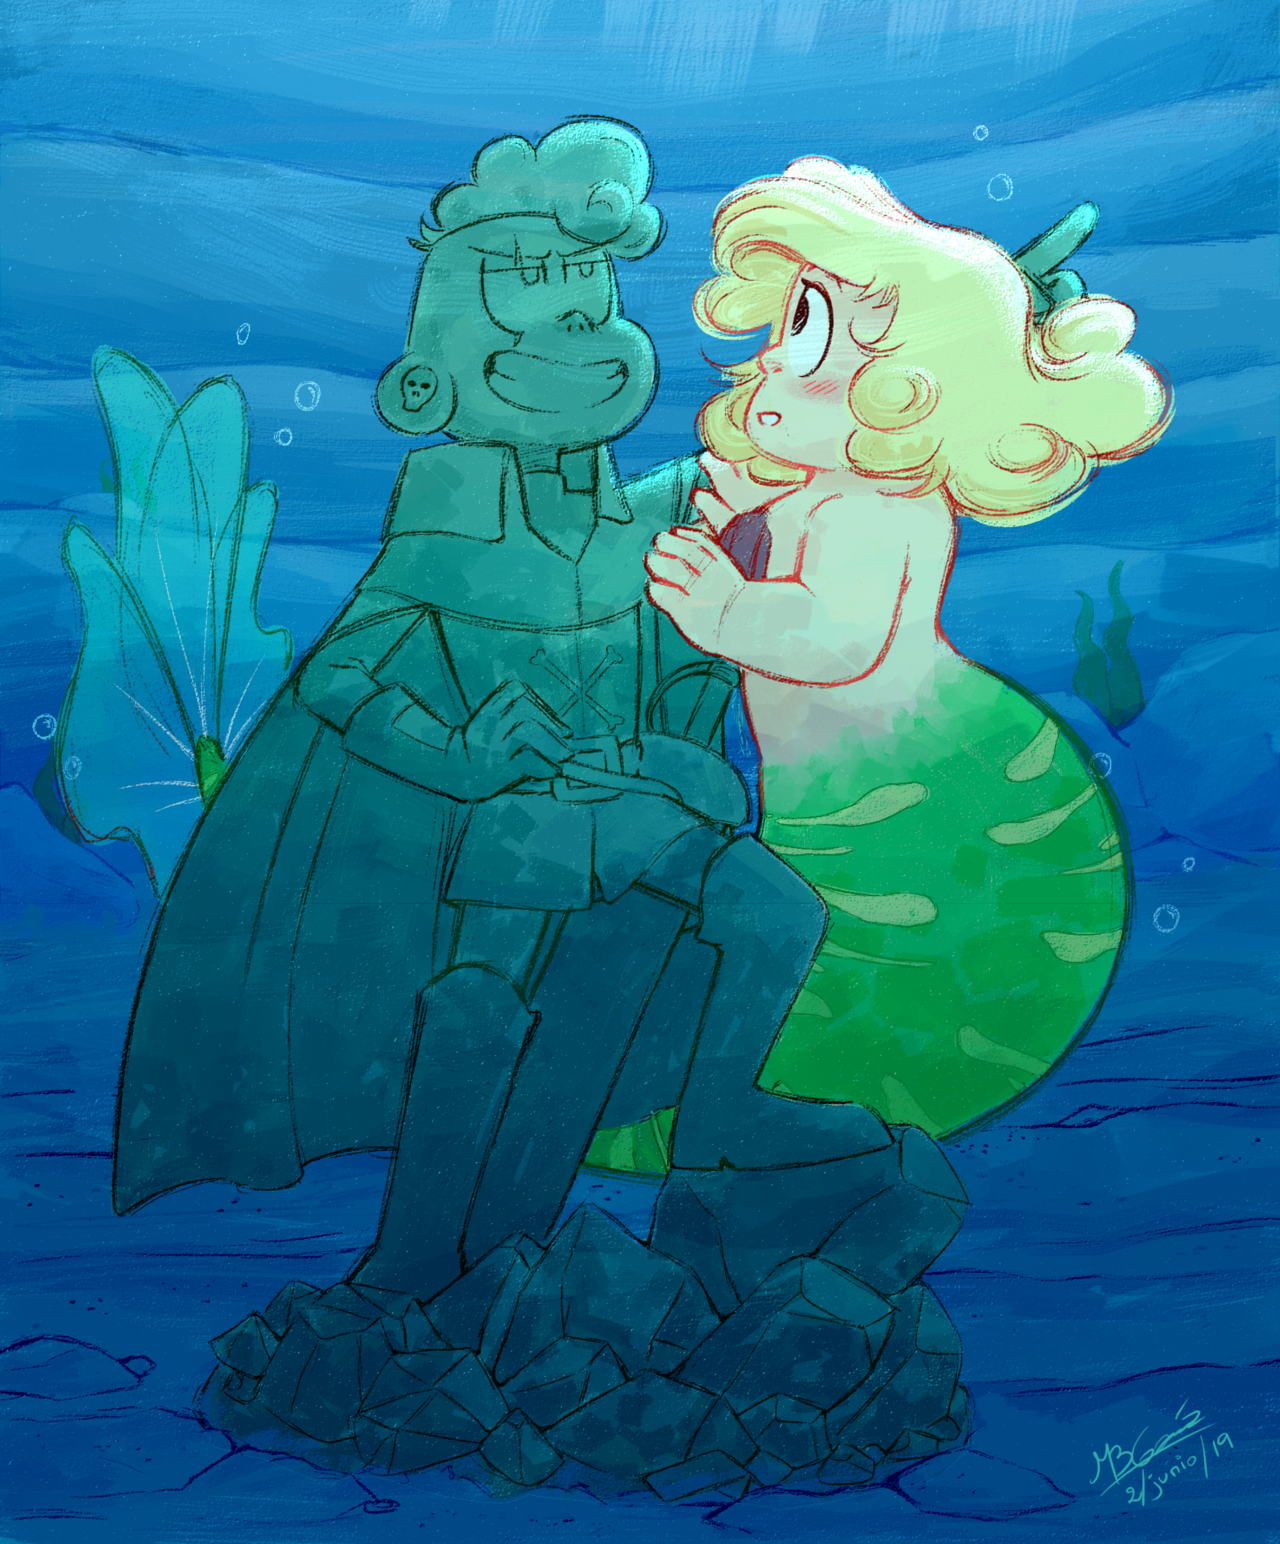 Some time ago i wanted to do something mermaid related with SU (i have more ideas though jkjñl), and then i was inspired by @arisuchan‘s wonderful fanart, I really loved the idea 💞💞 of course i used a...